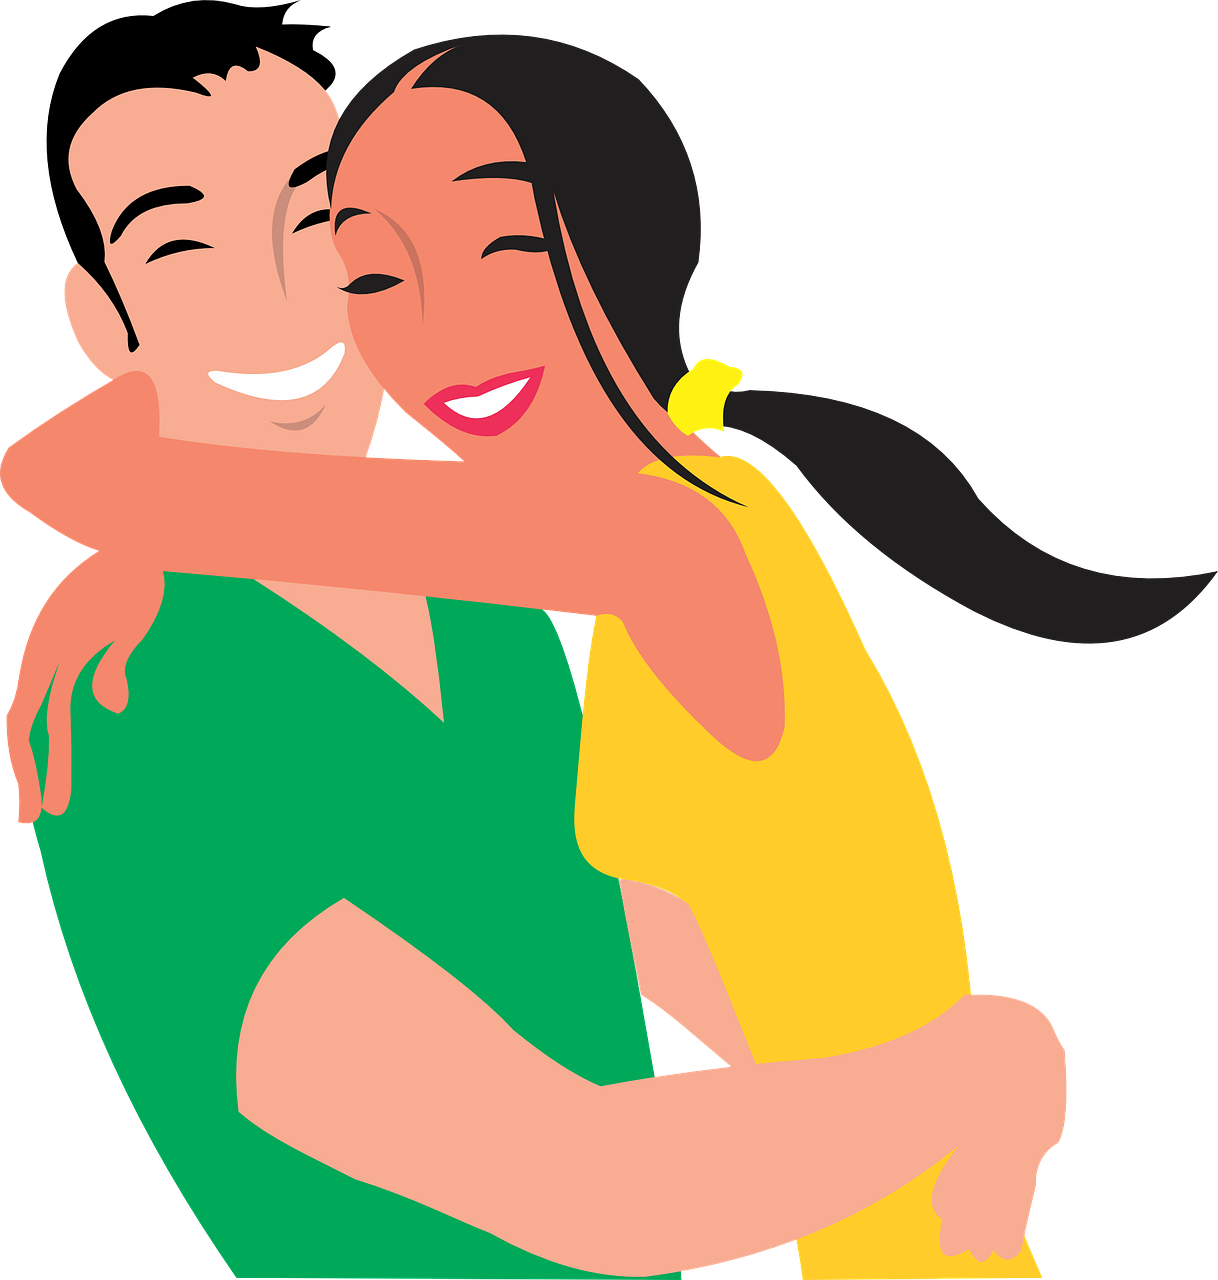 Tags. hug clipart healthy relationship 1373808. 